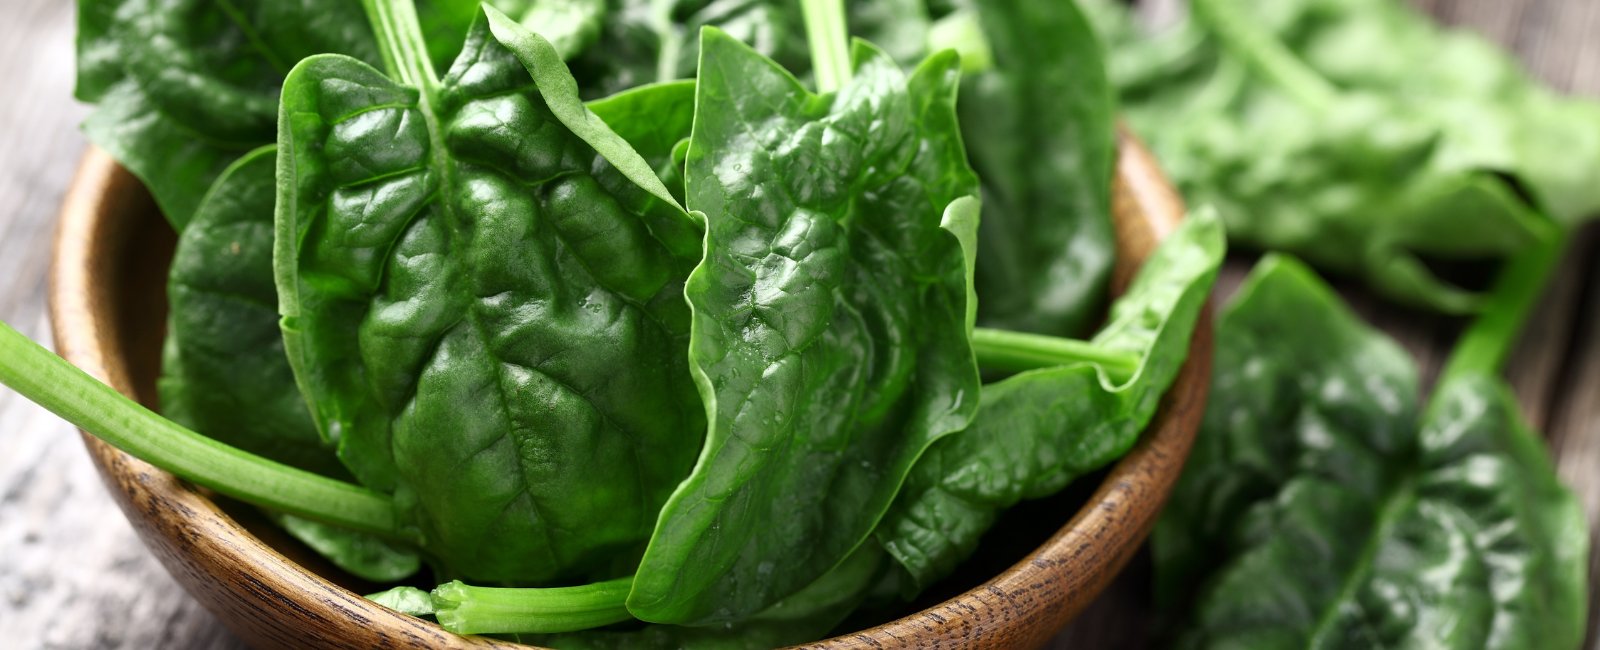 BASIC INFORMATION ABOUT SPINACH